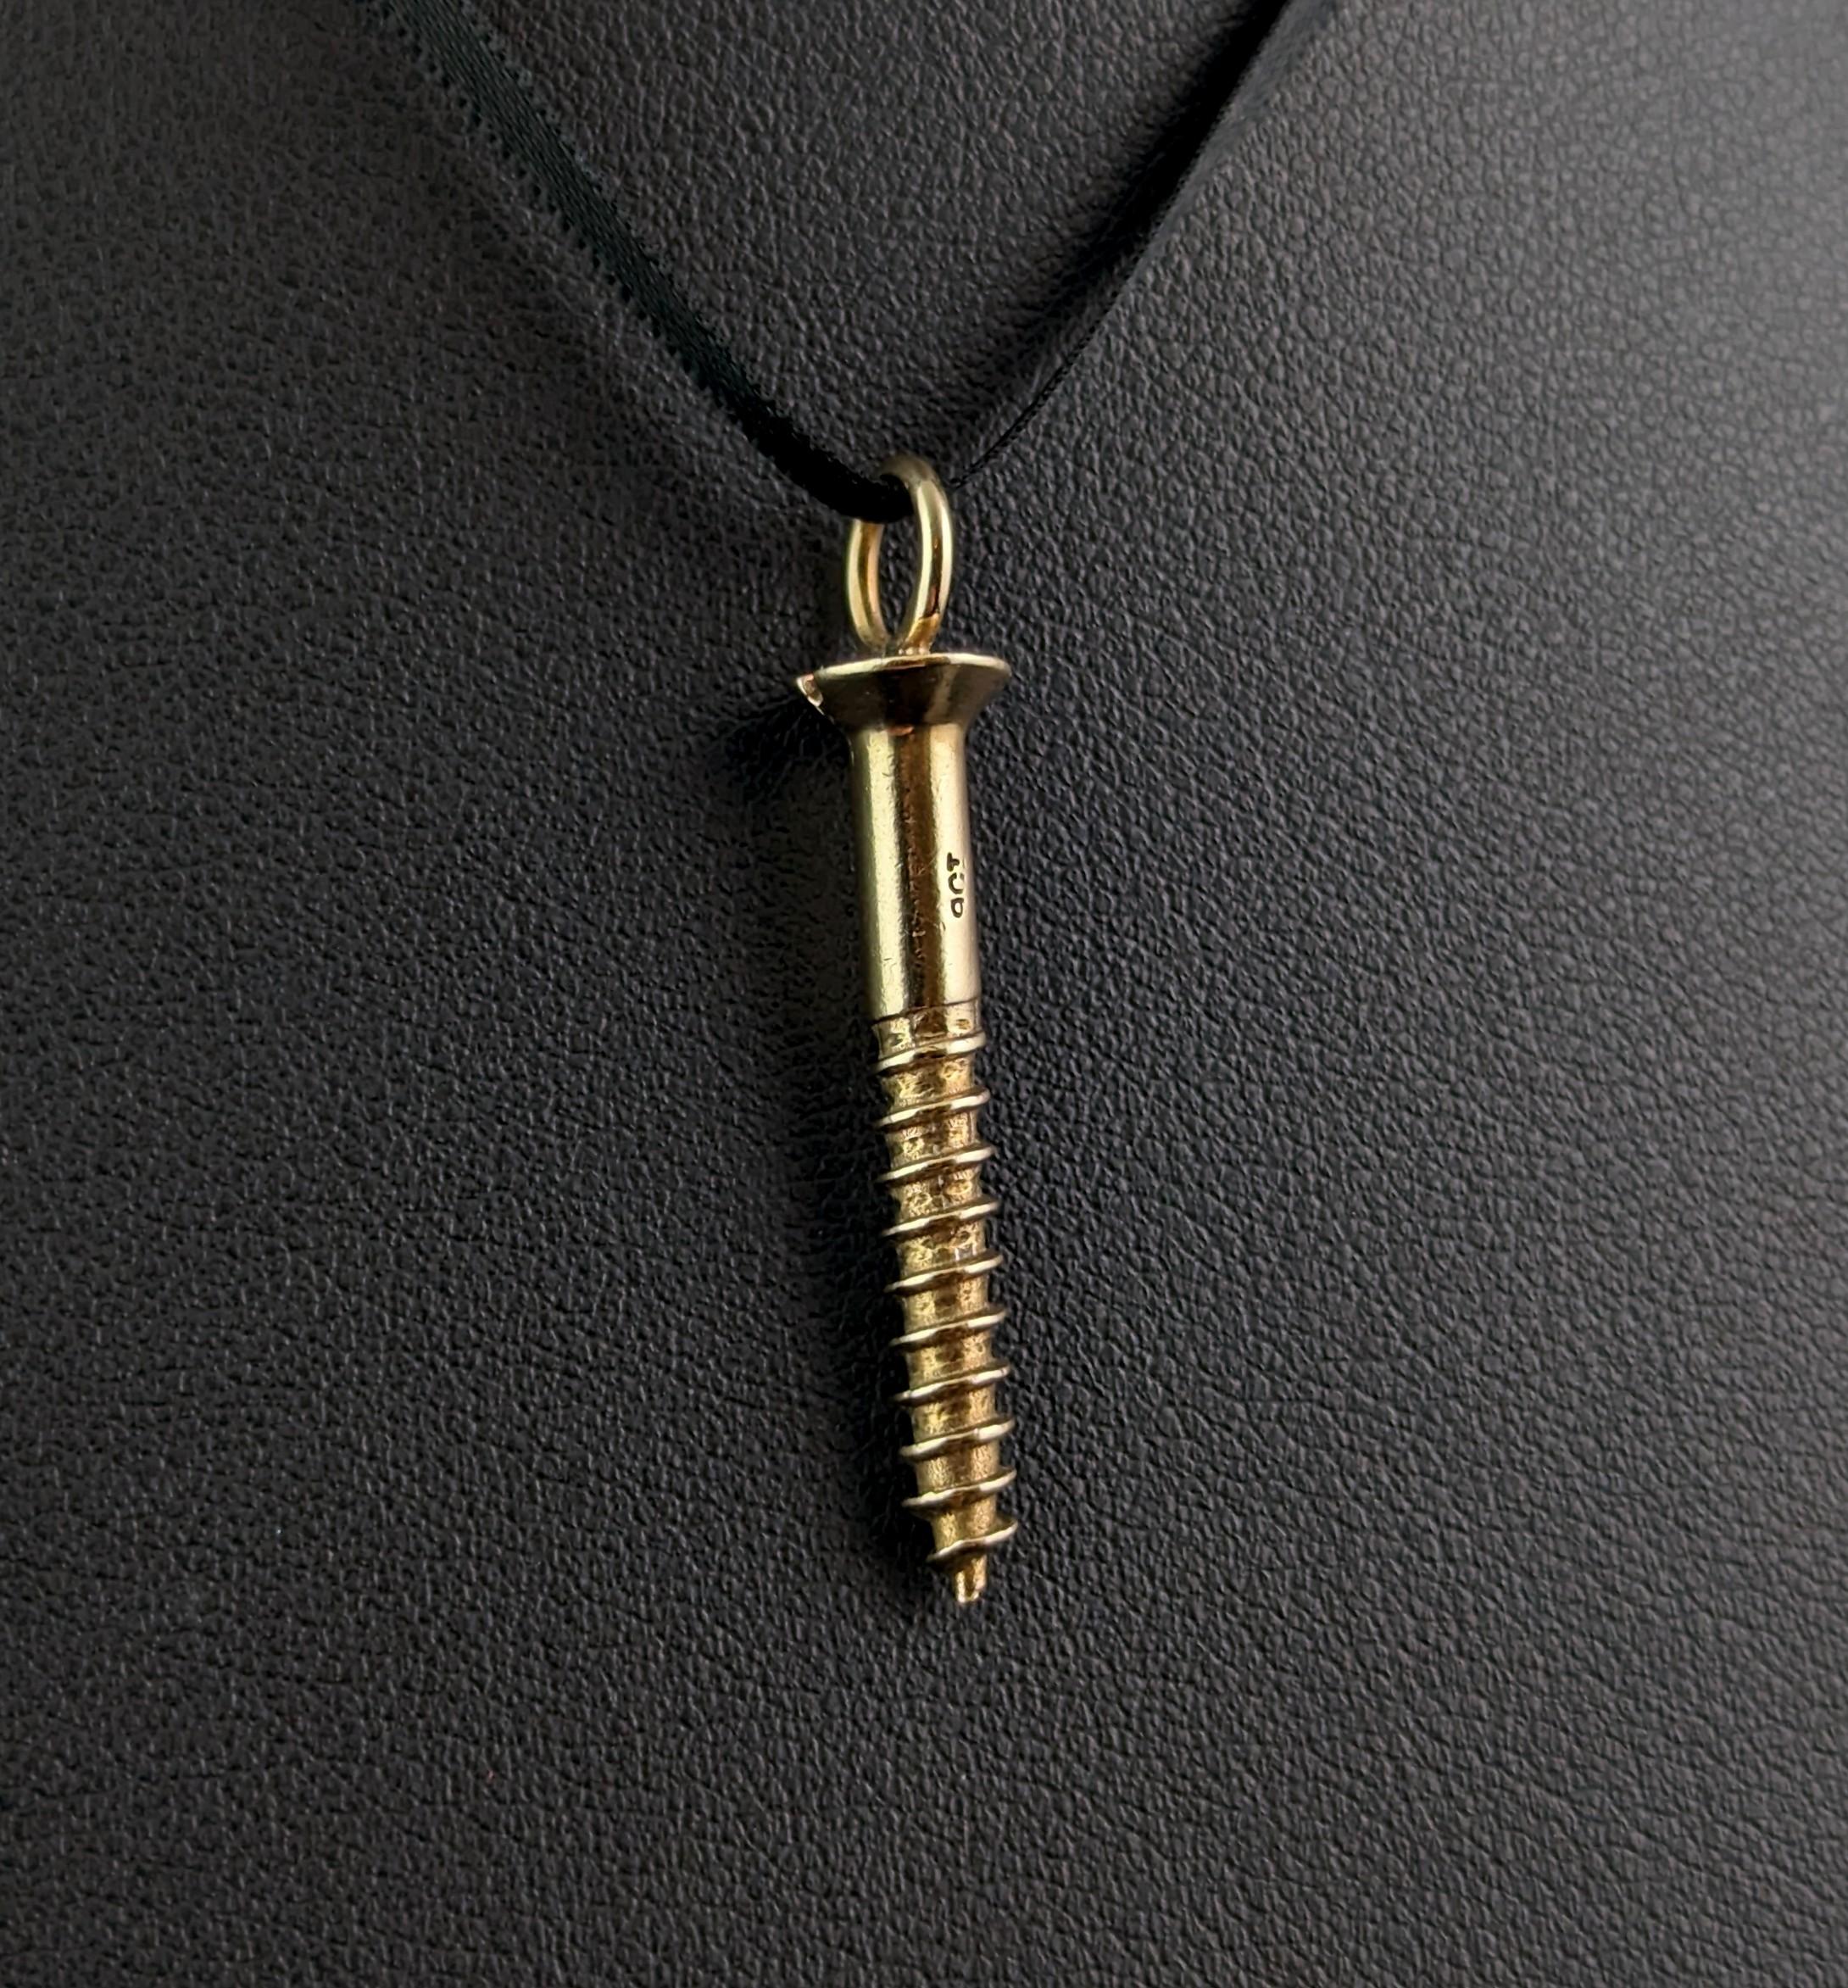 This fabulous novelty vintage 9ct gold screw pendant is truly a fantastic piece.

Small yet mighty, it is made from solid 9ct gold and is realistically modelled as a screw with an integral bale to the top.

So interesting and versatile this pendant